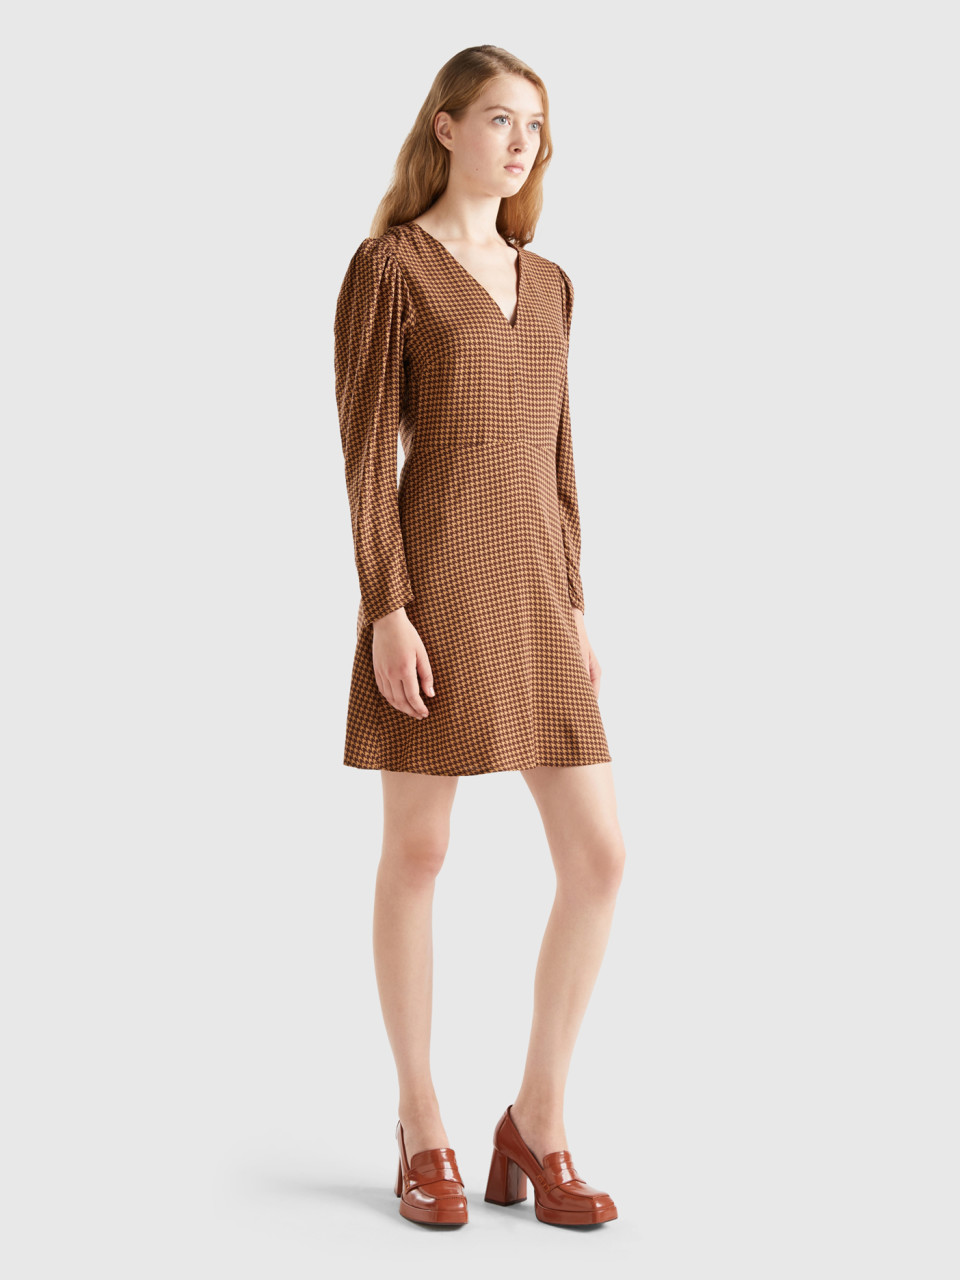 Benetton, Patterned Dress In Sustainable Viscose, Brown, Women